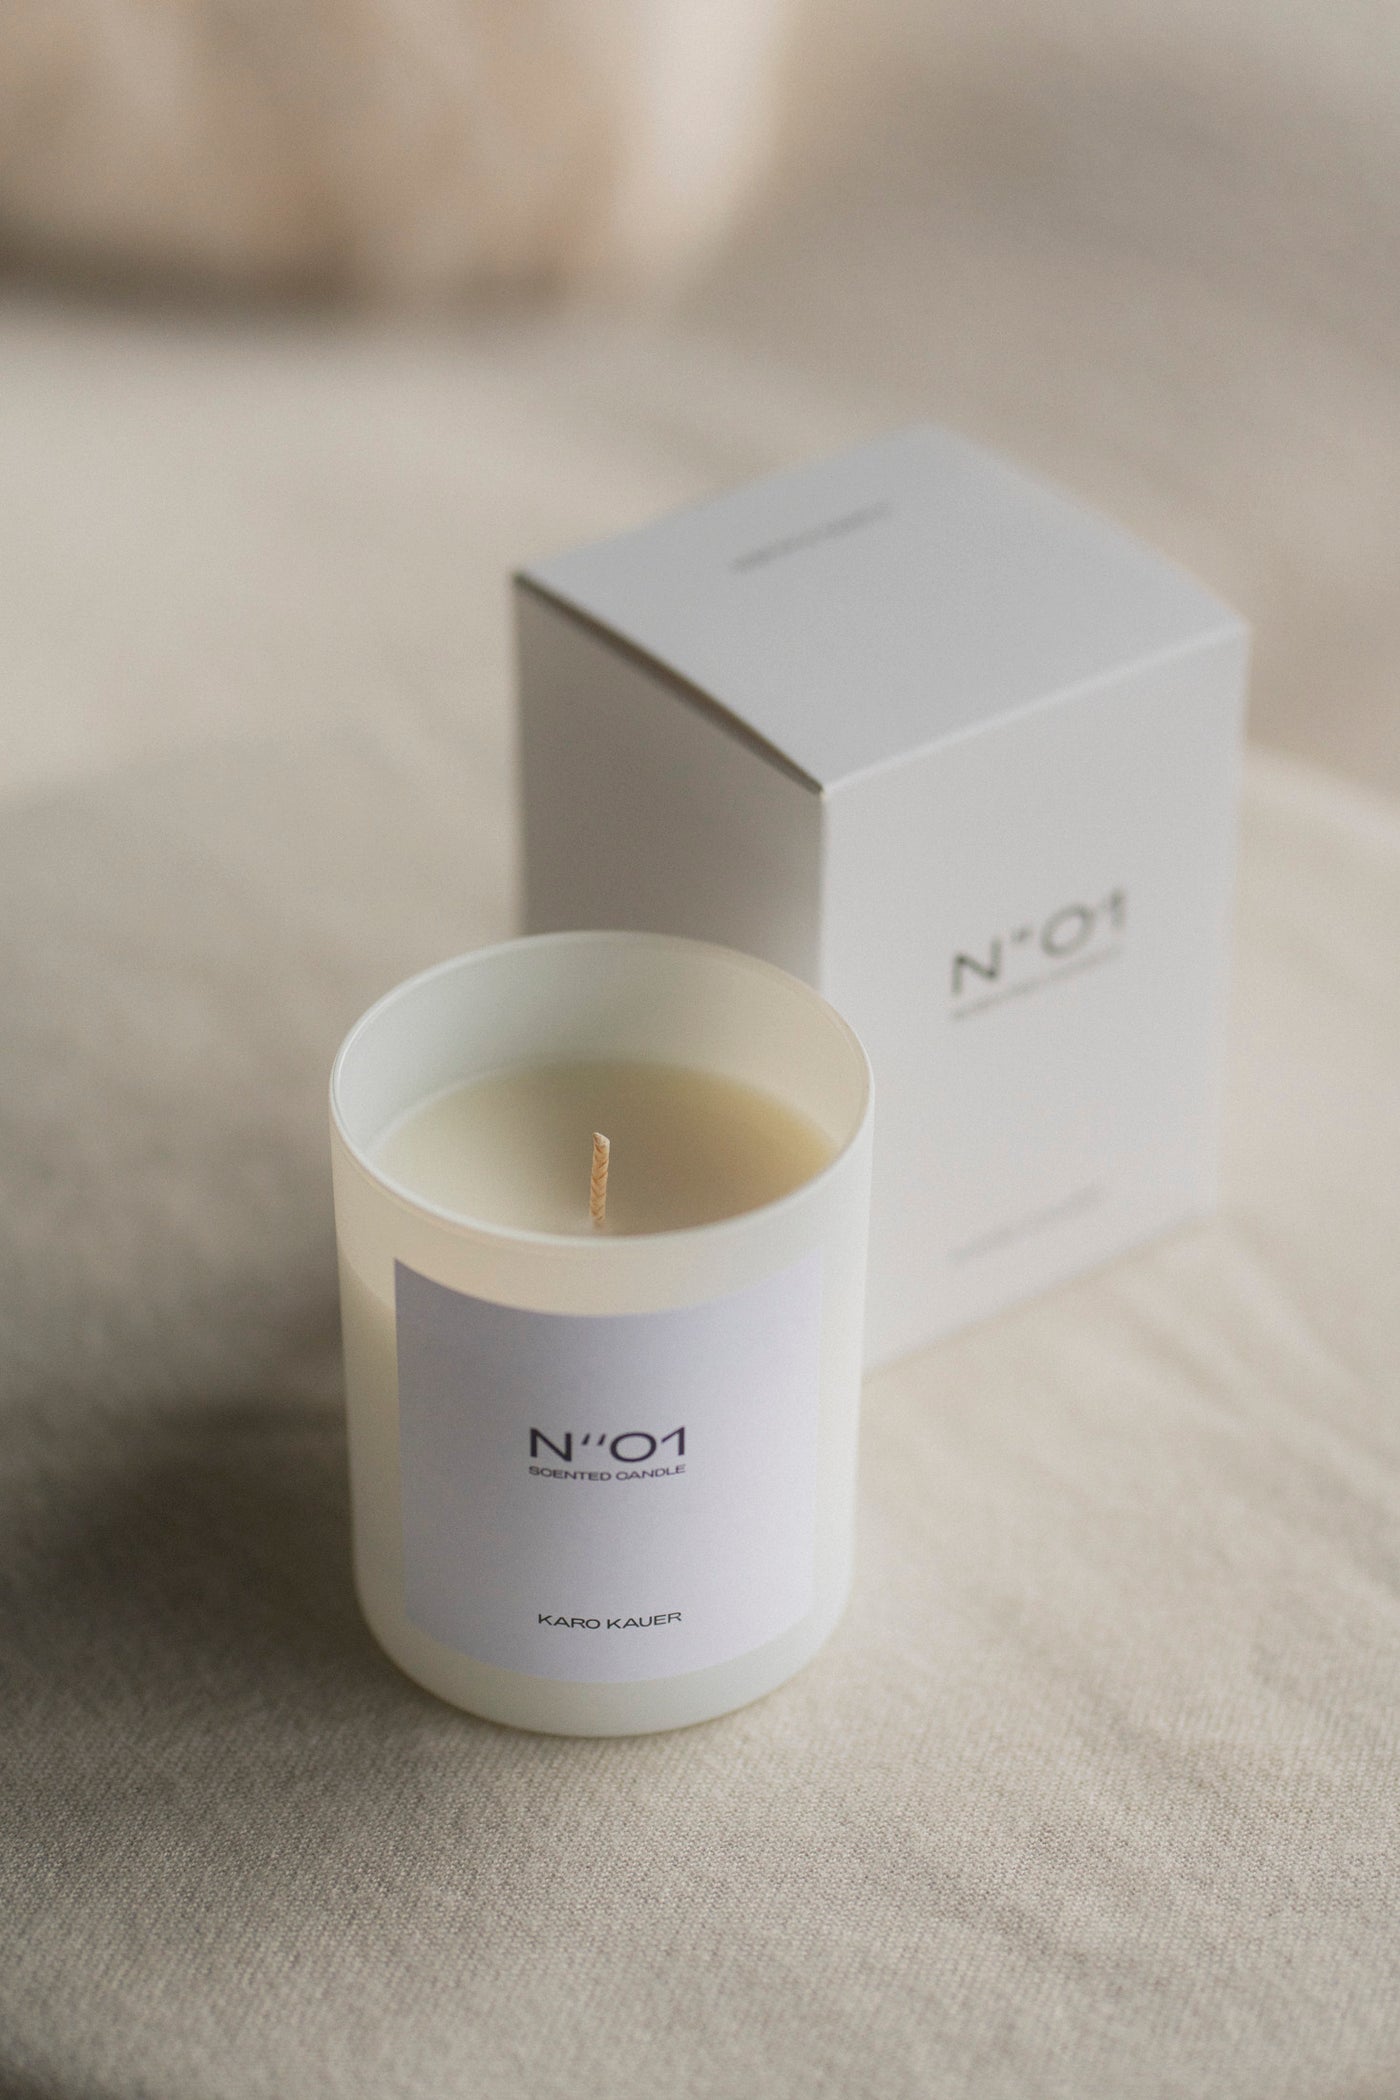 N''O1 Scented Candle